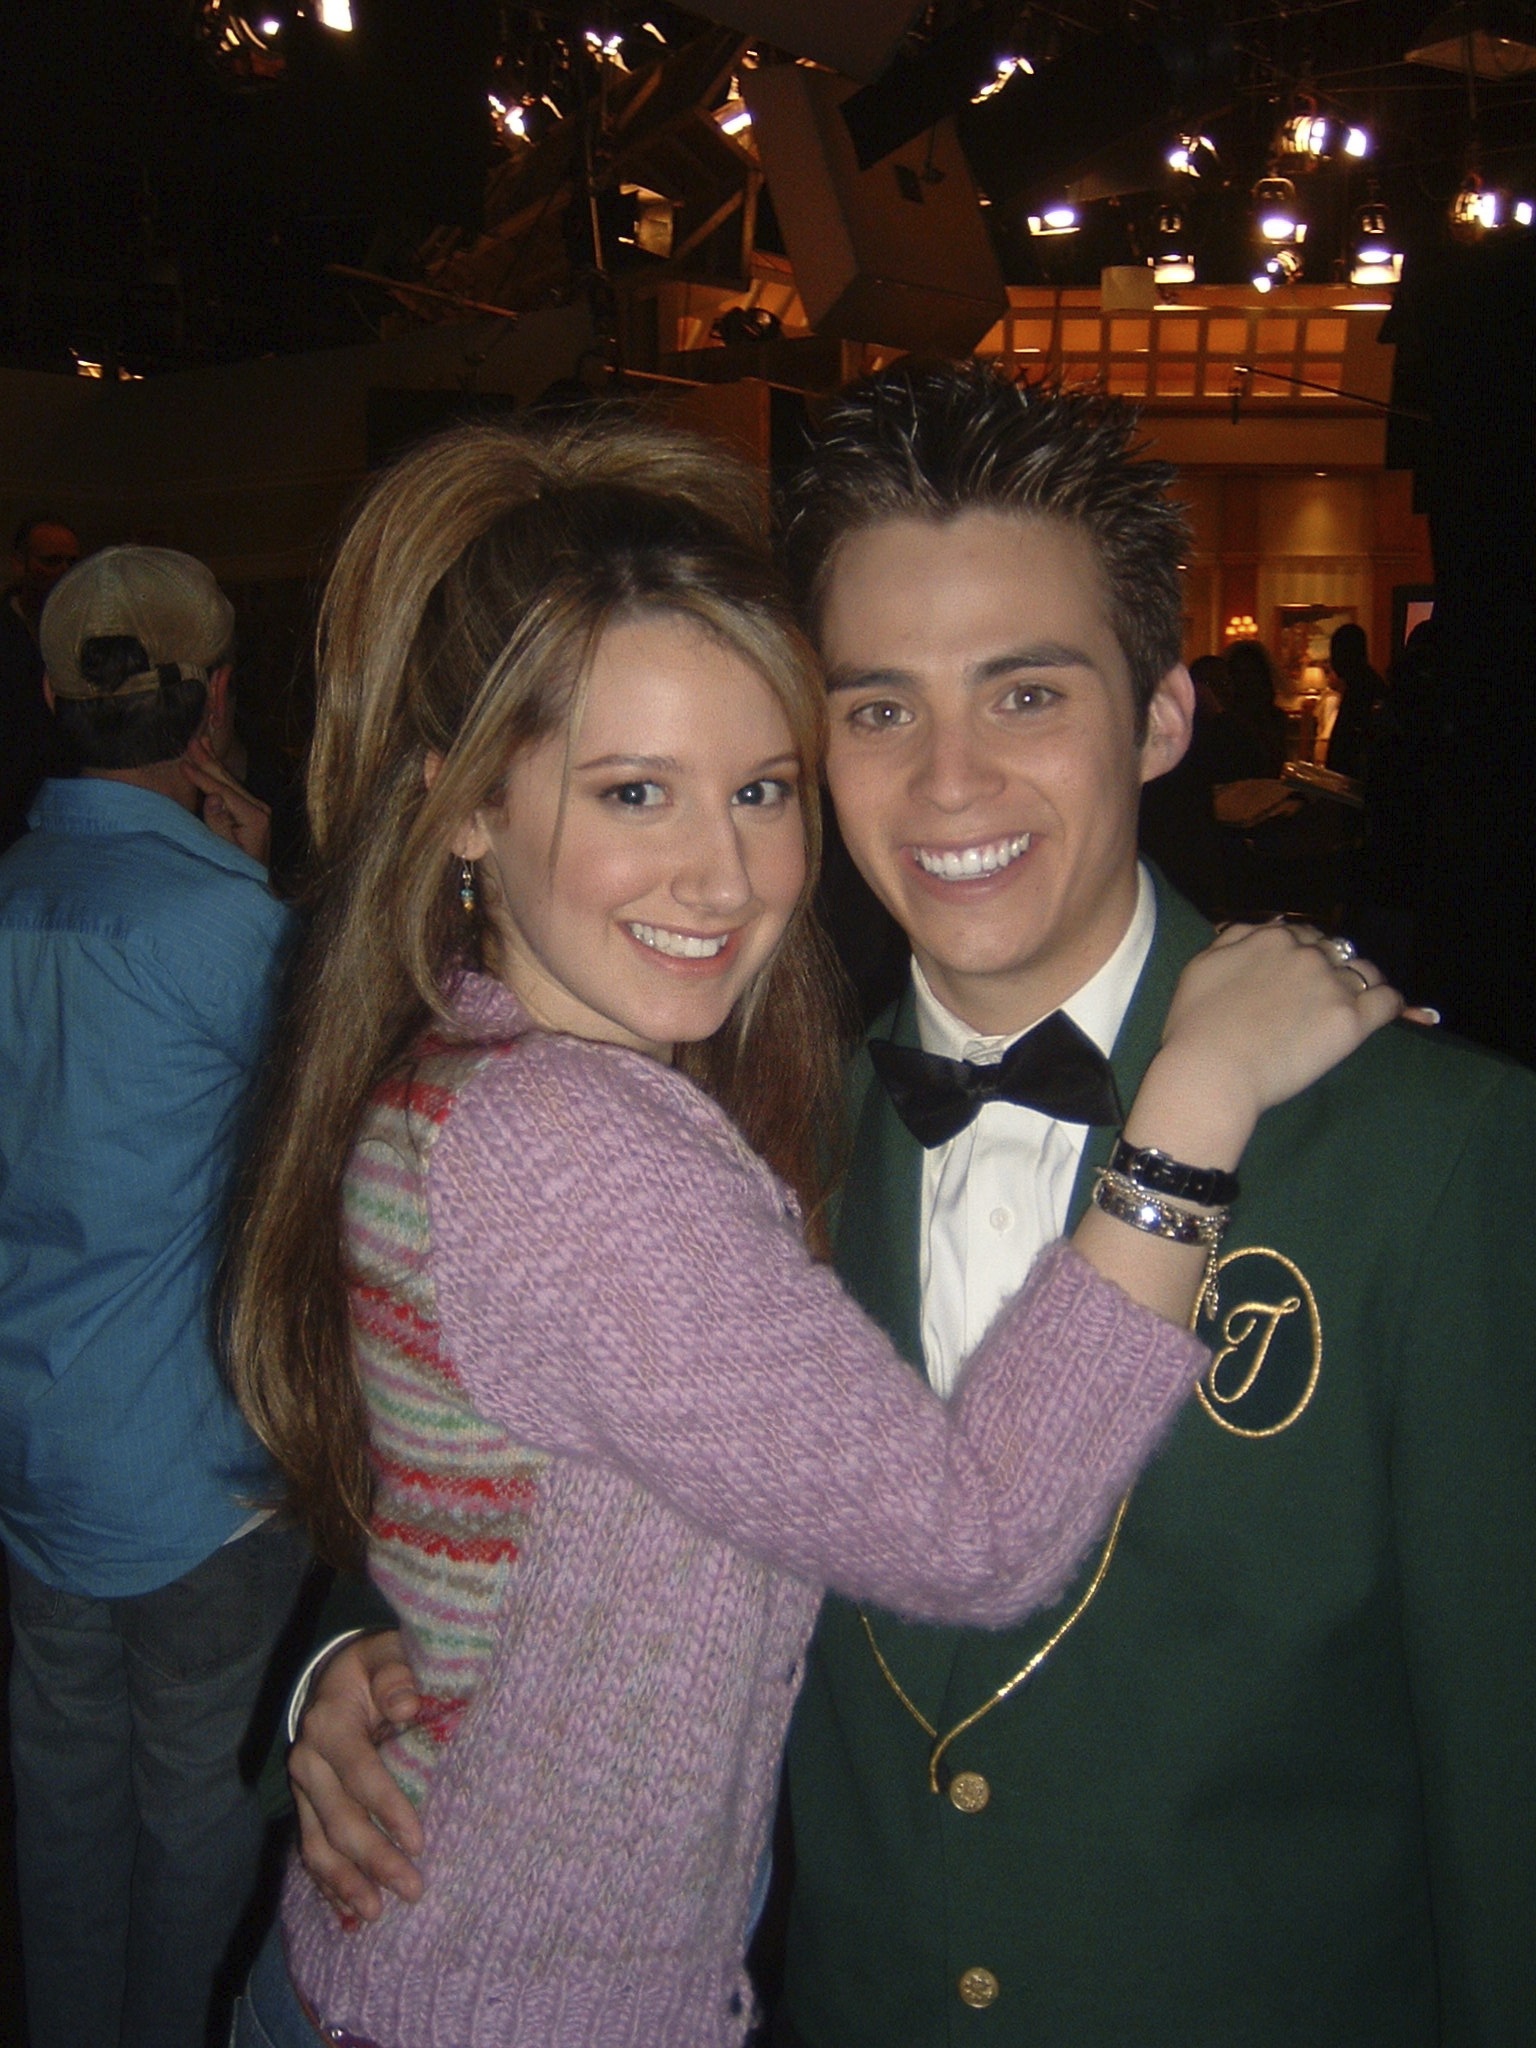 Ashley Tisdale & Vince Rimoldi on the set of The Suite Life of Zack and Cody